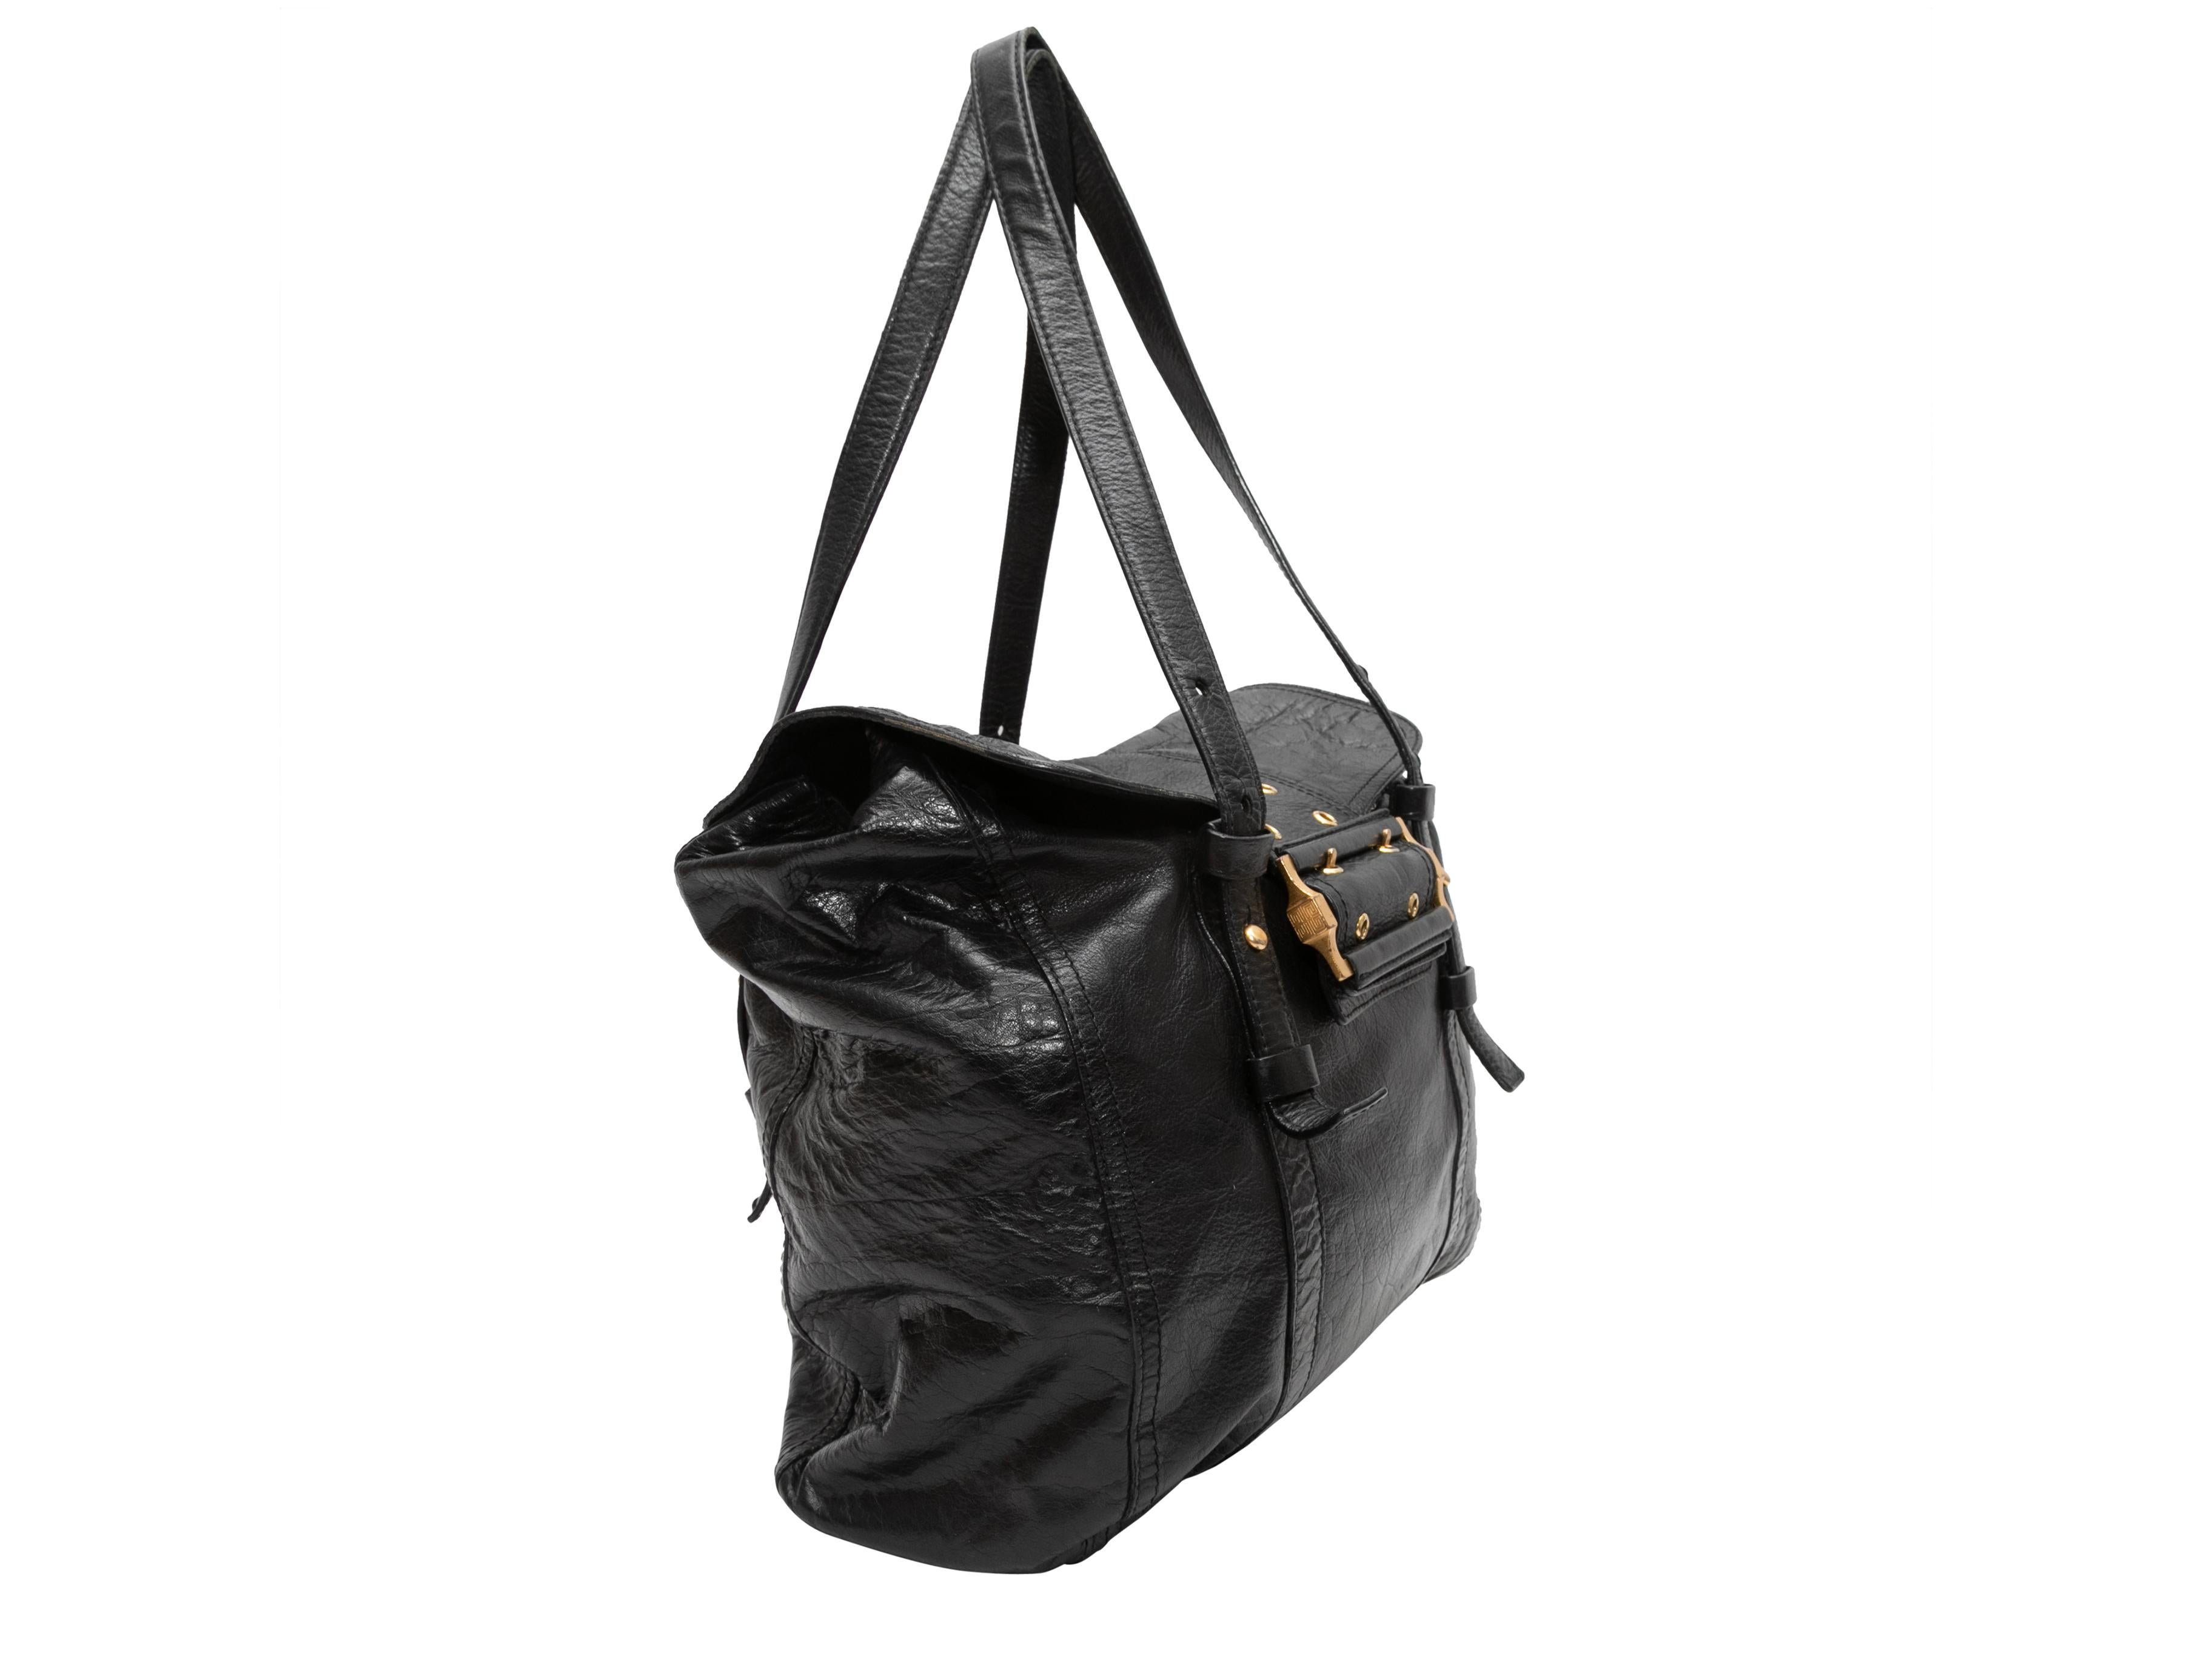 Black Givenchy Large Leather Buckle Tote. This tote bag features a leather body, gold-tone hardware, dual flat adjustable shoulder straps, and a front buckle closure. 15